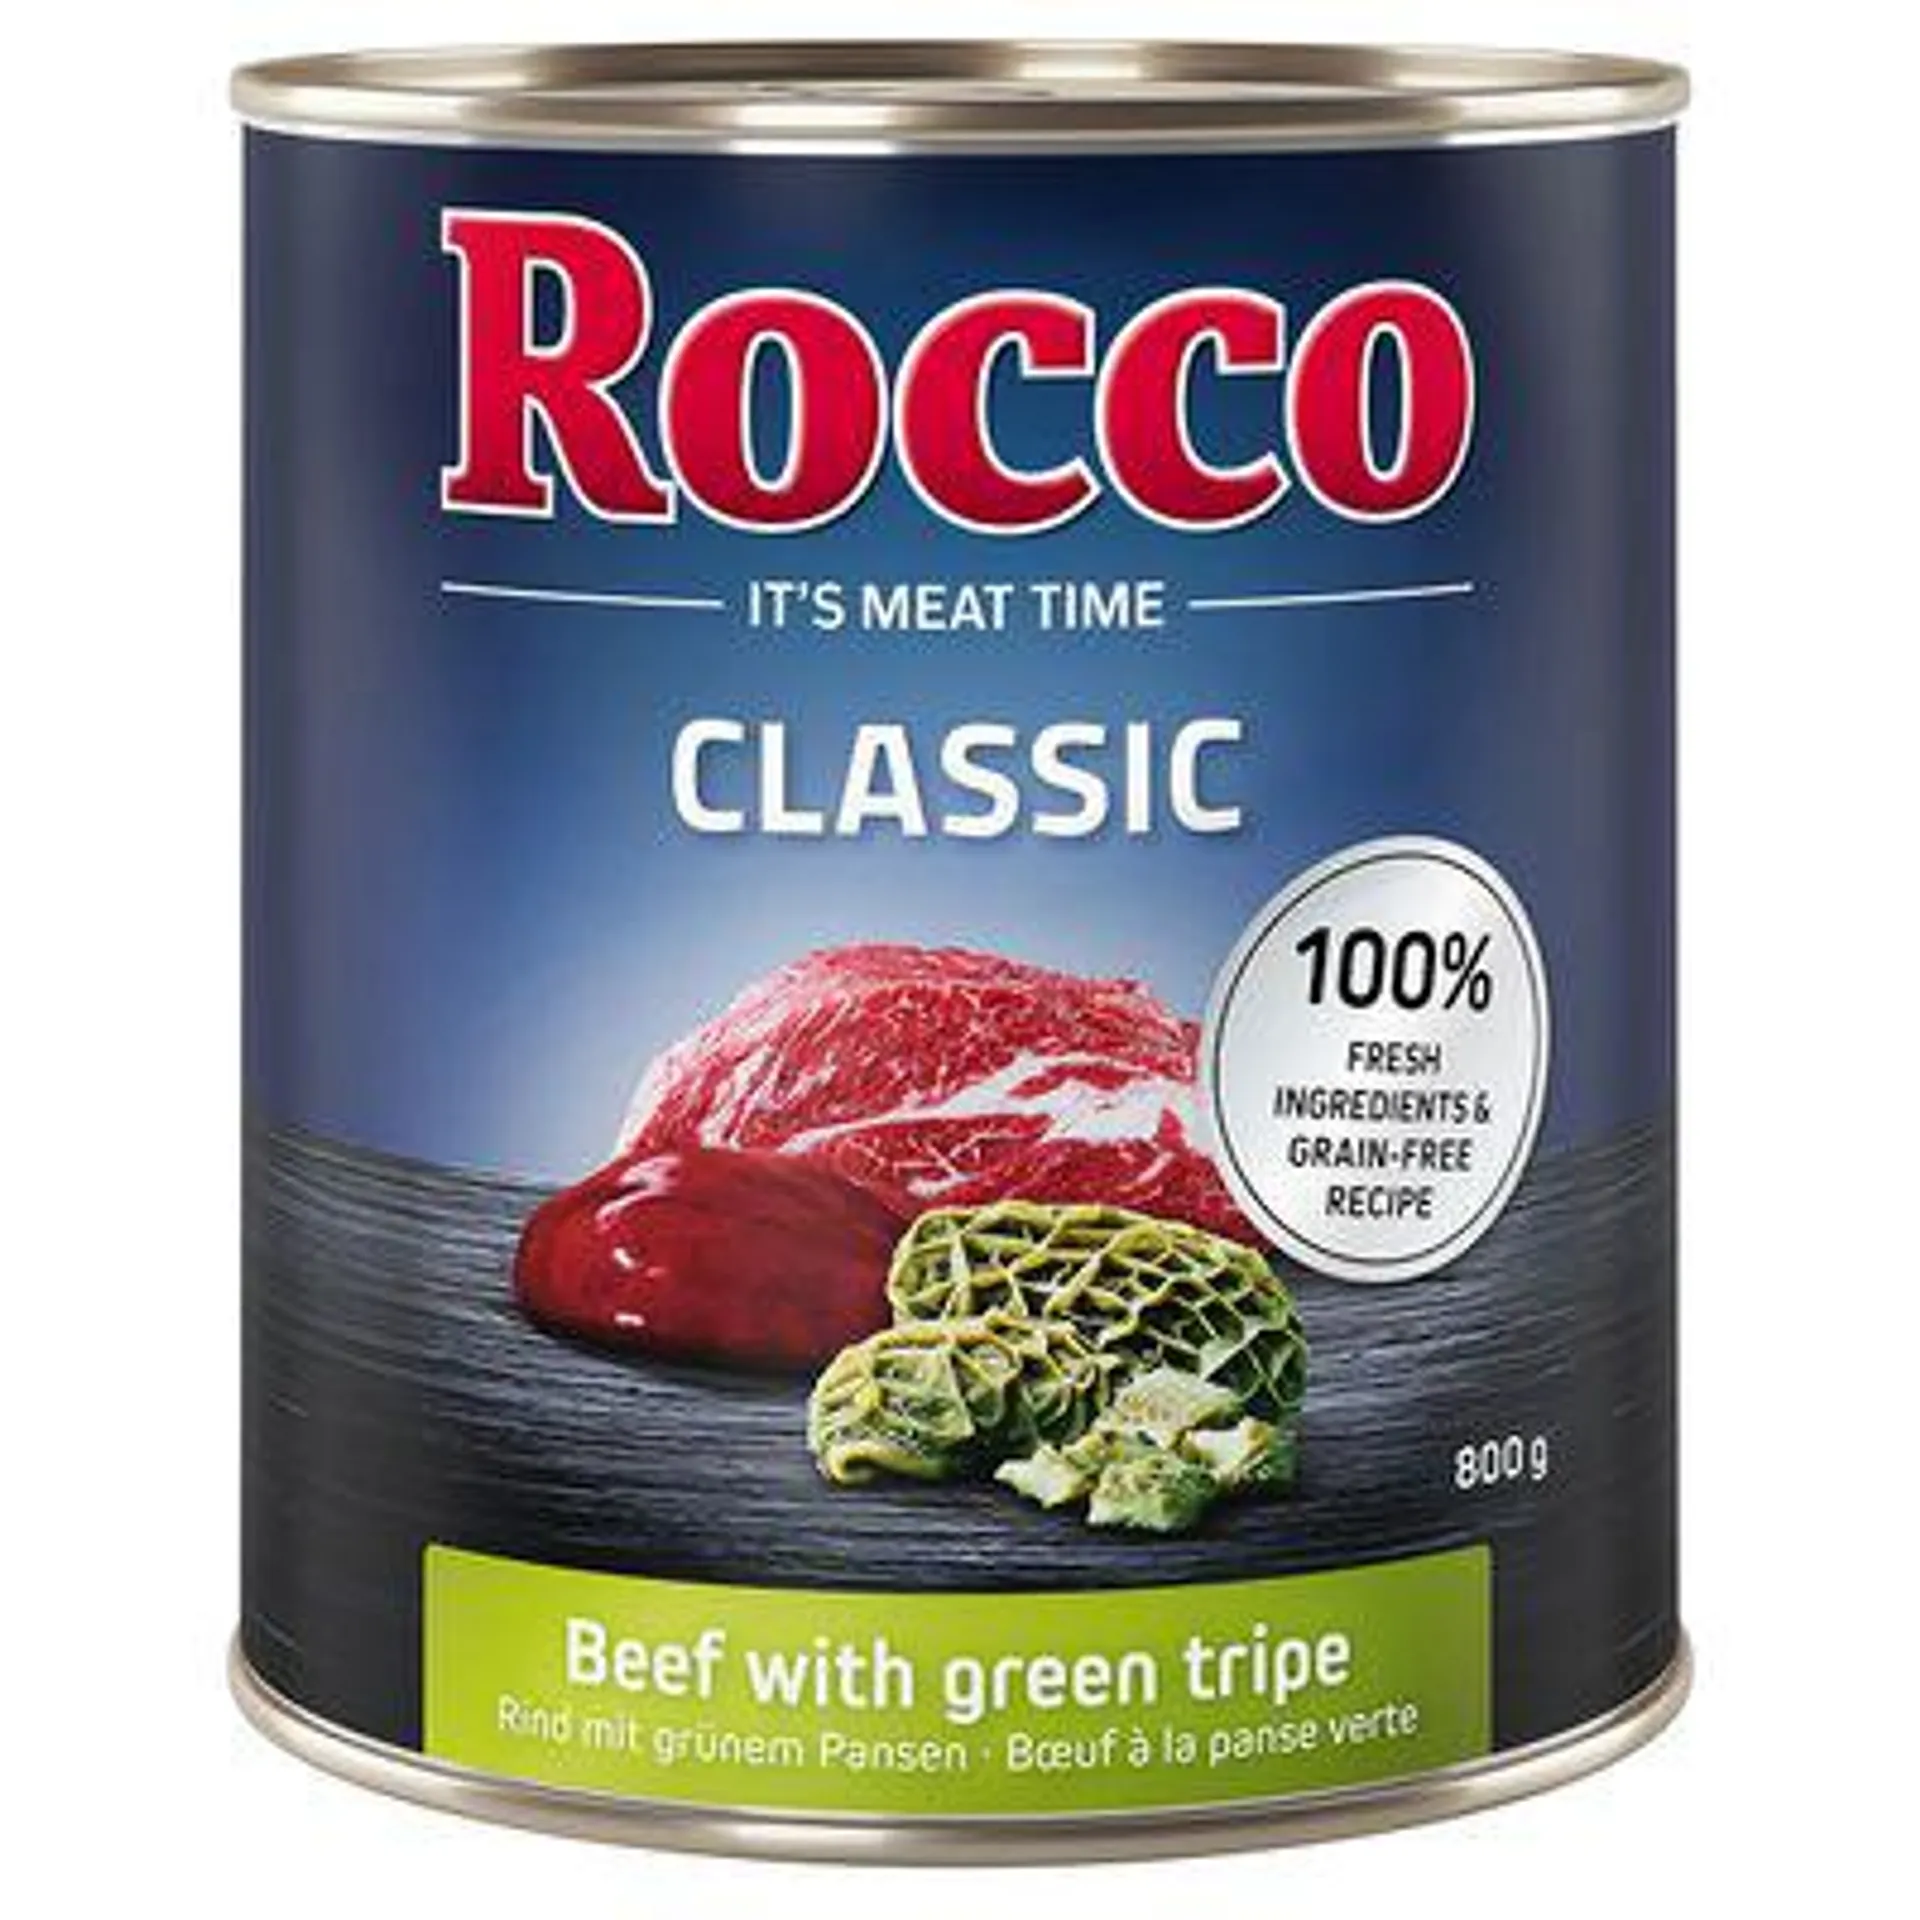 24 x 800g Rocco Classic Wet Dog Food - Special Price! *